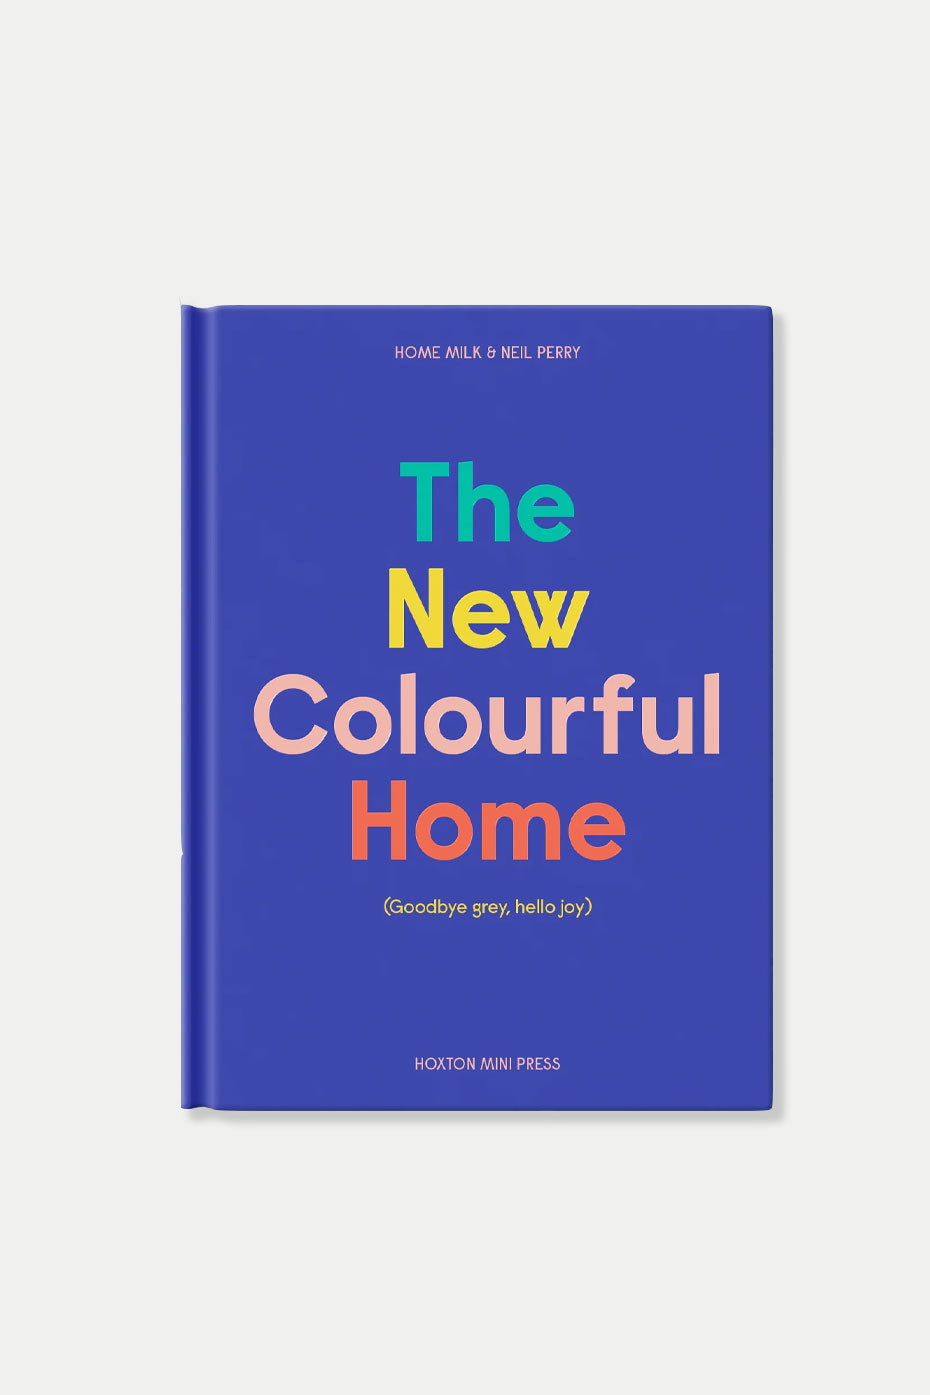 Turnaround Books The New Colourful Home